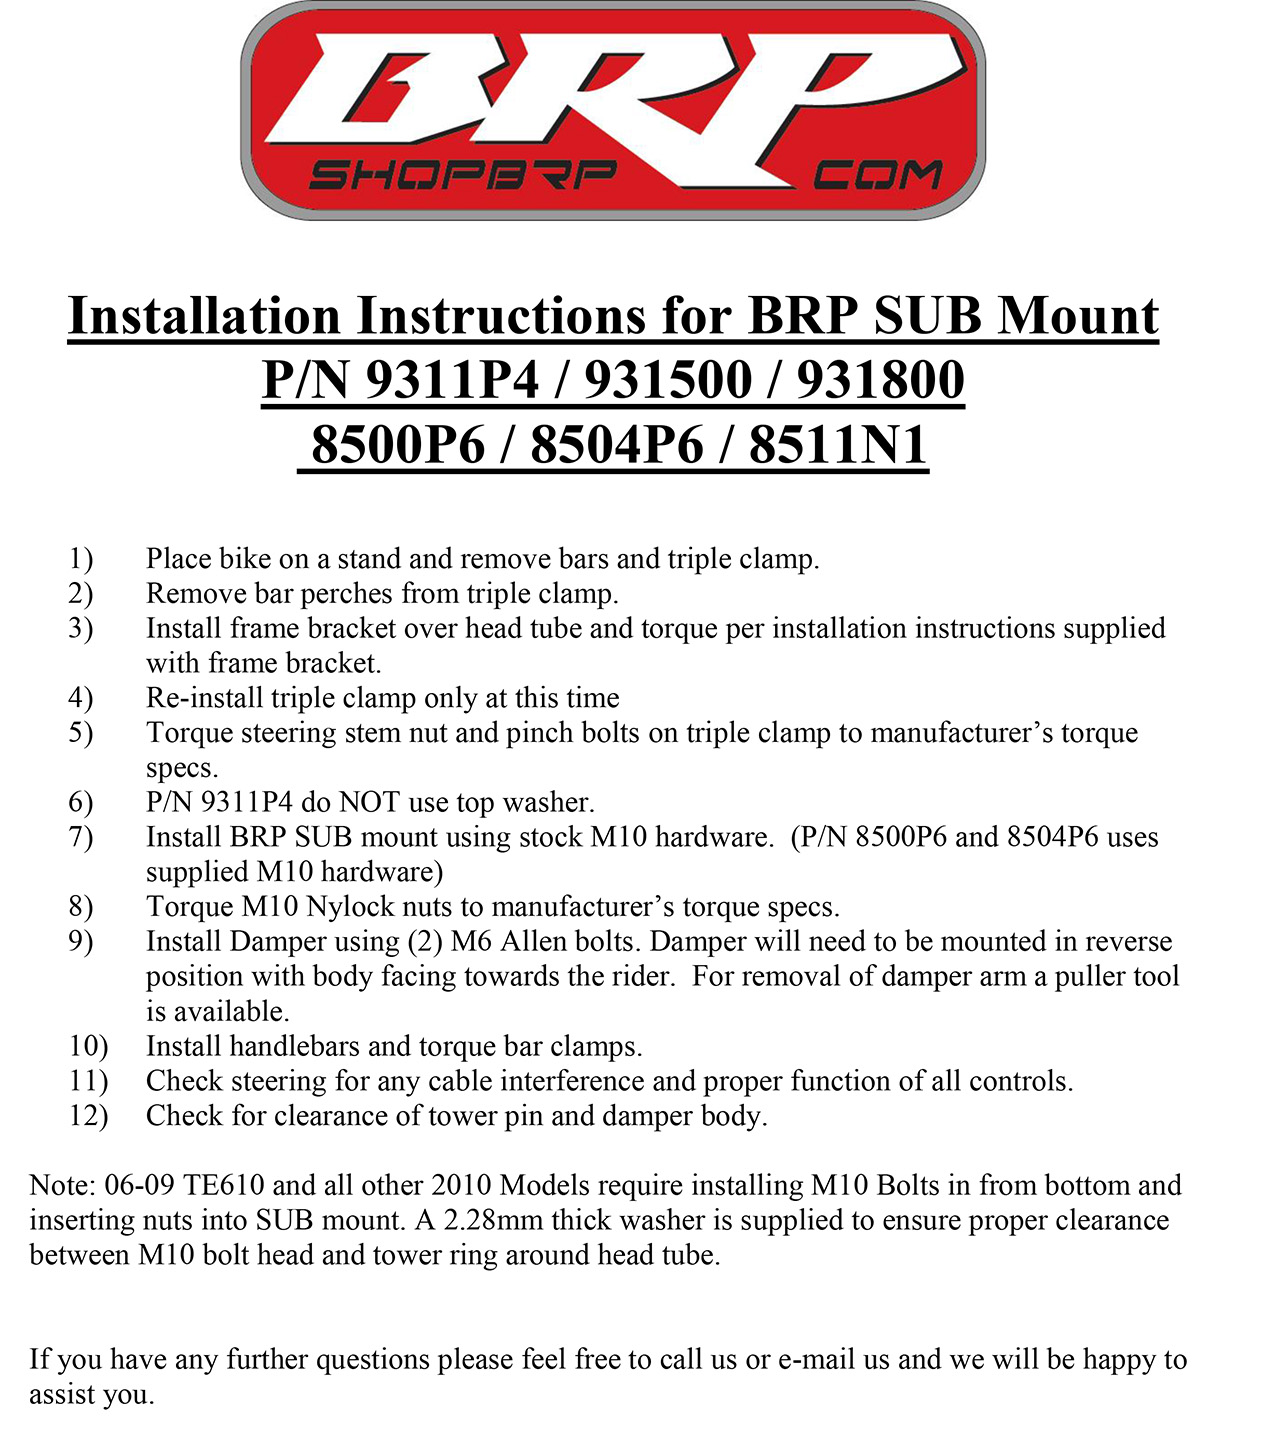 Installation Instructions for BRP SUB Mount